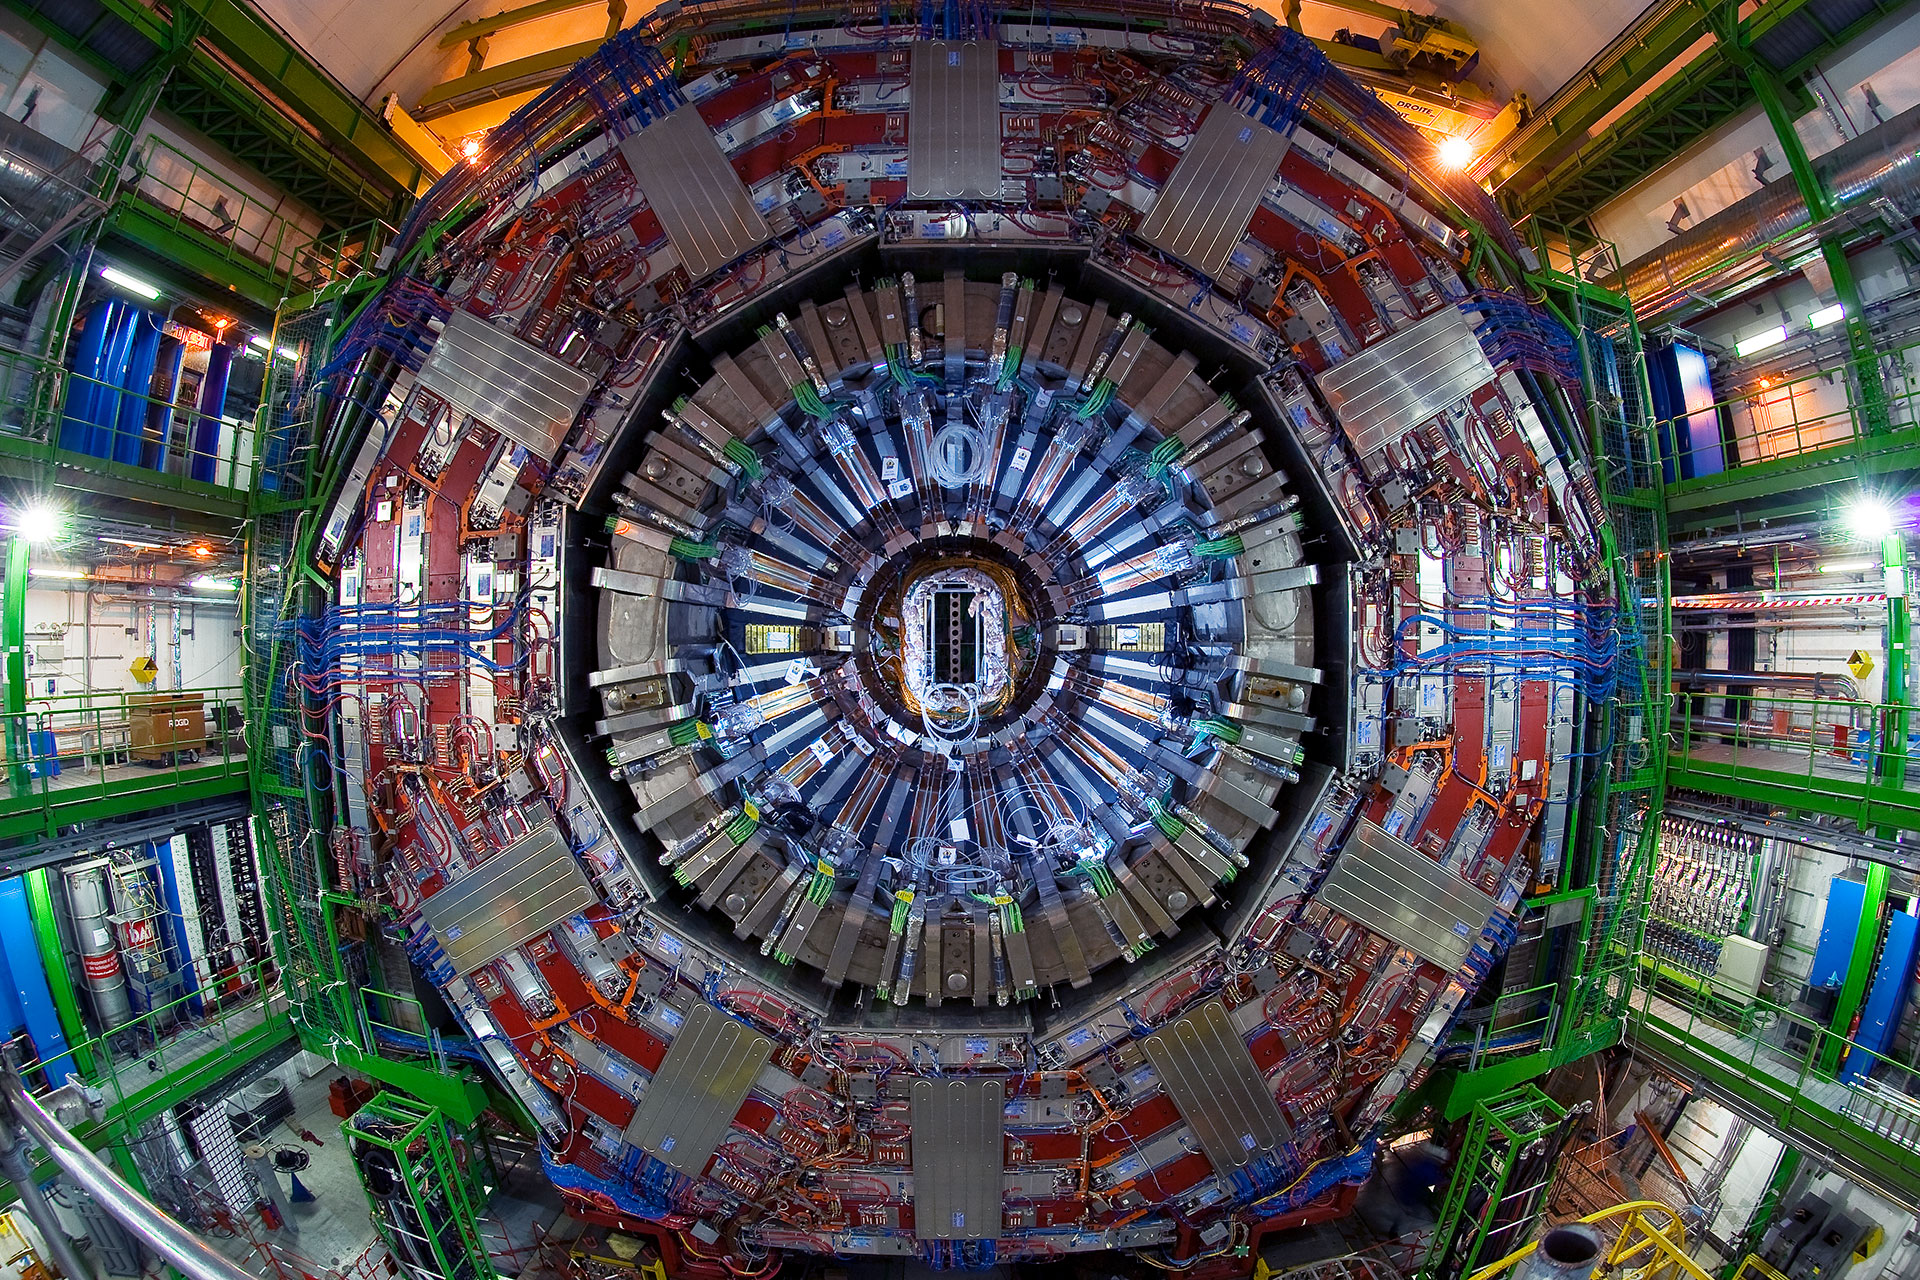 <strong>1,300,000 MEGAWATT HOURS: LHC </strong>1,300,000 MWh energy consumption (1/2): How much energy can we afford to use in the hunt for new particles? After the Large Hadron Collider at CERN in Geneva, the physicist James Beacham would now also like to build an accelerator on the moon. Image: Maximilien Brice/Cern